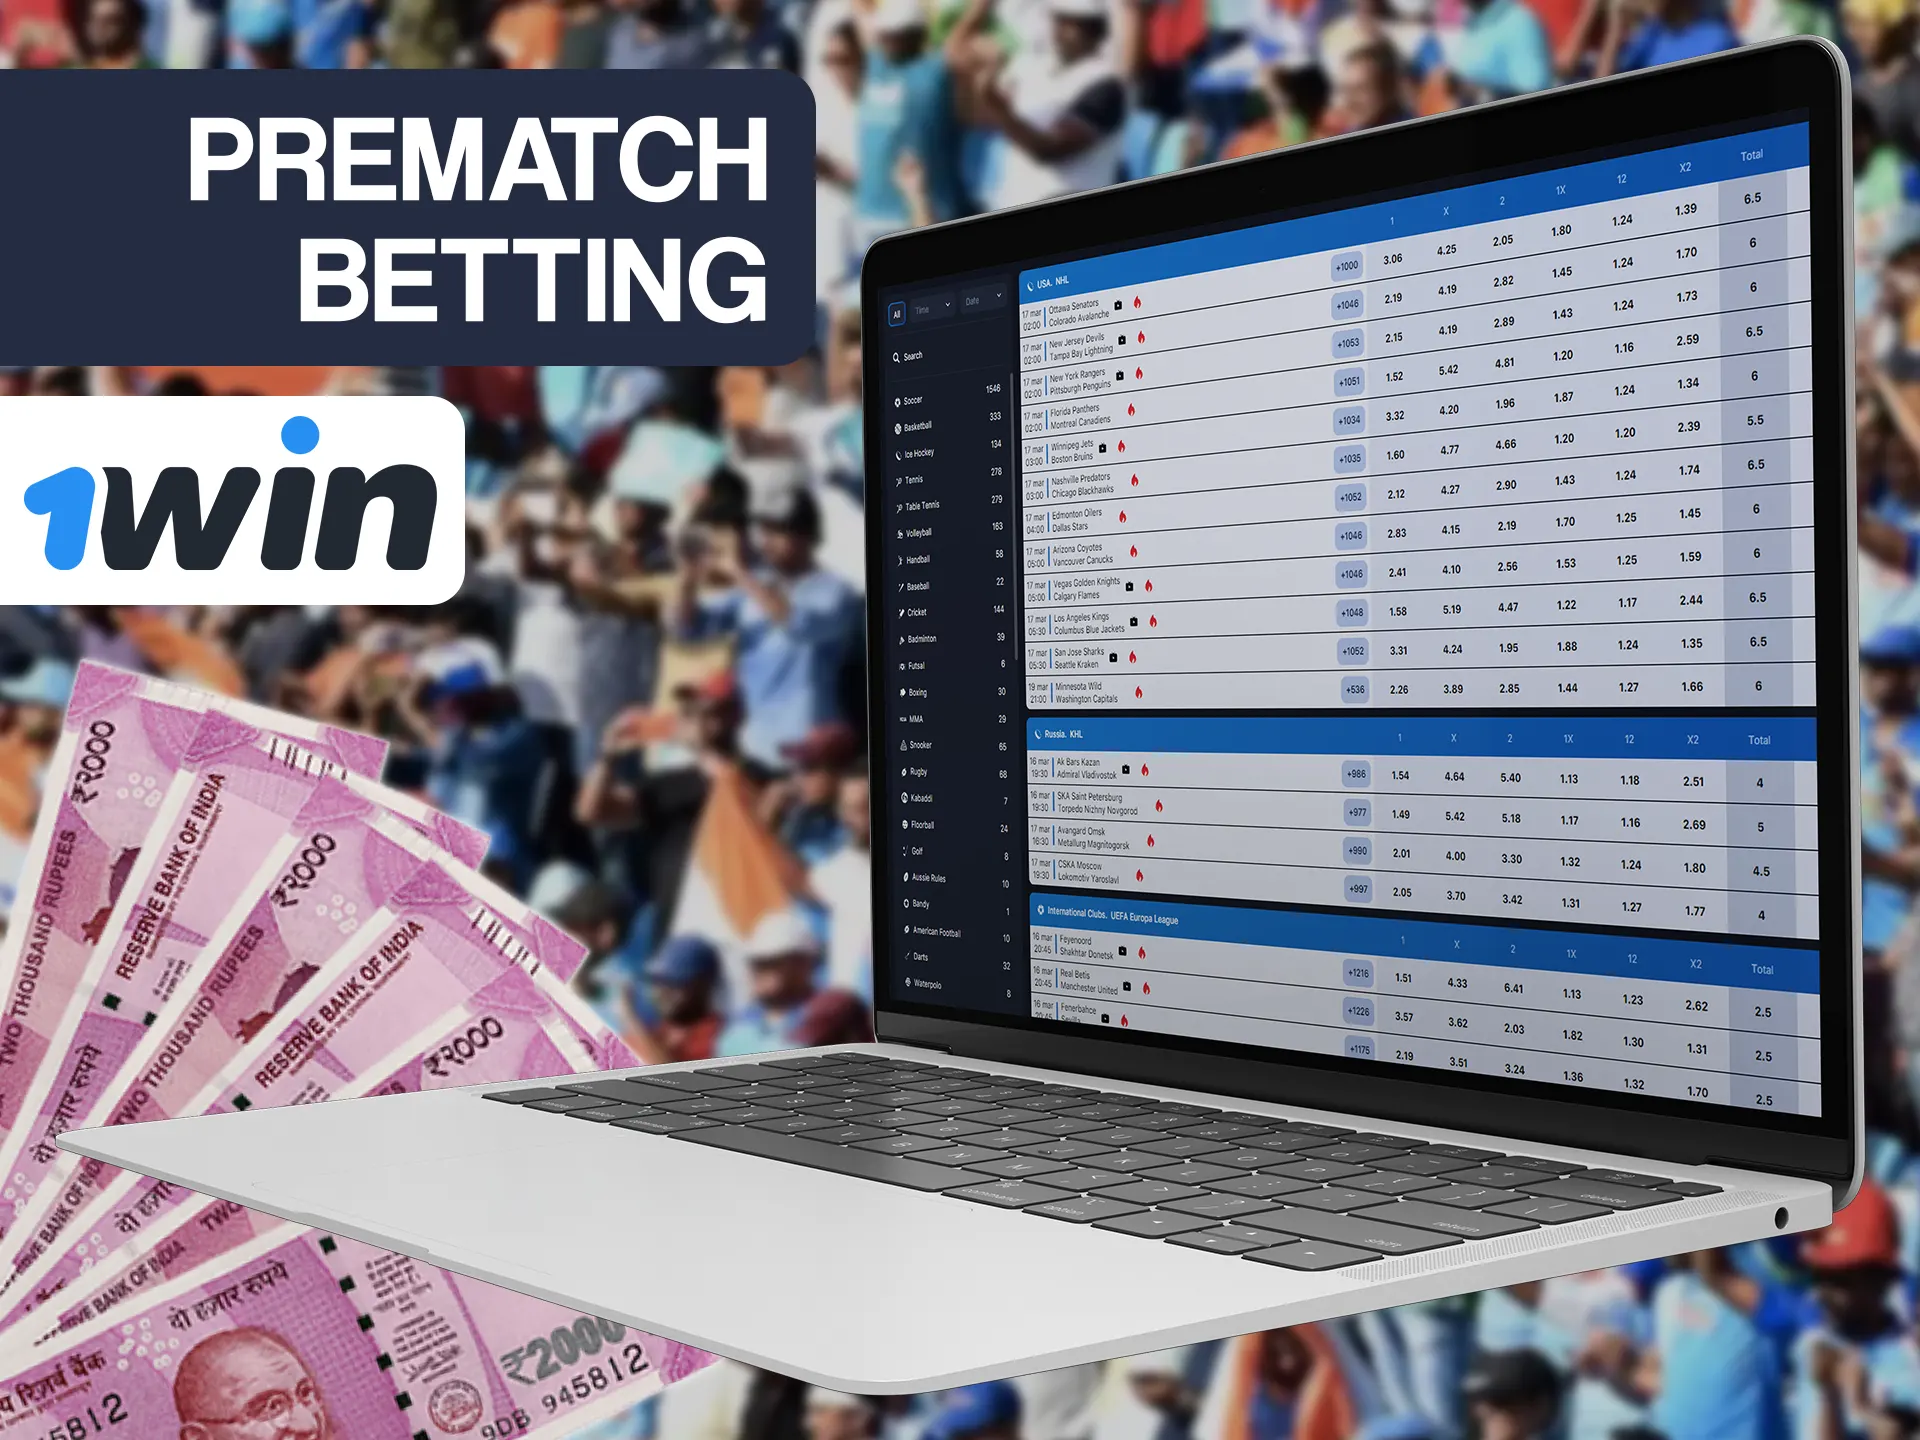 Make sure bets on future matches at 1win.